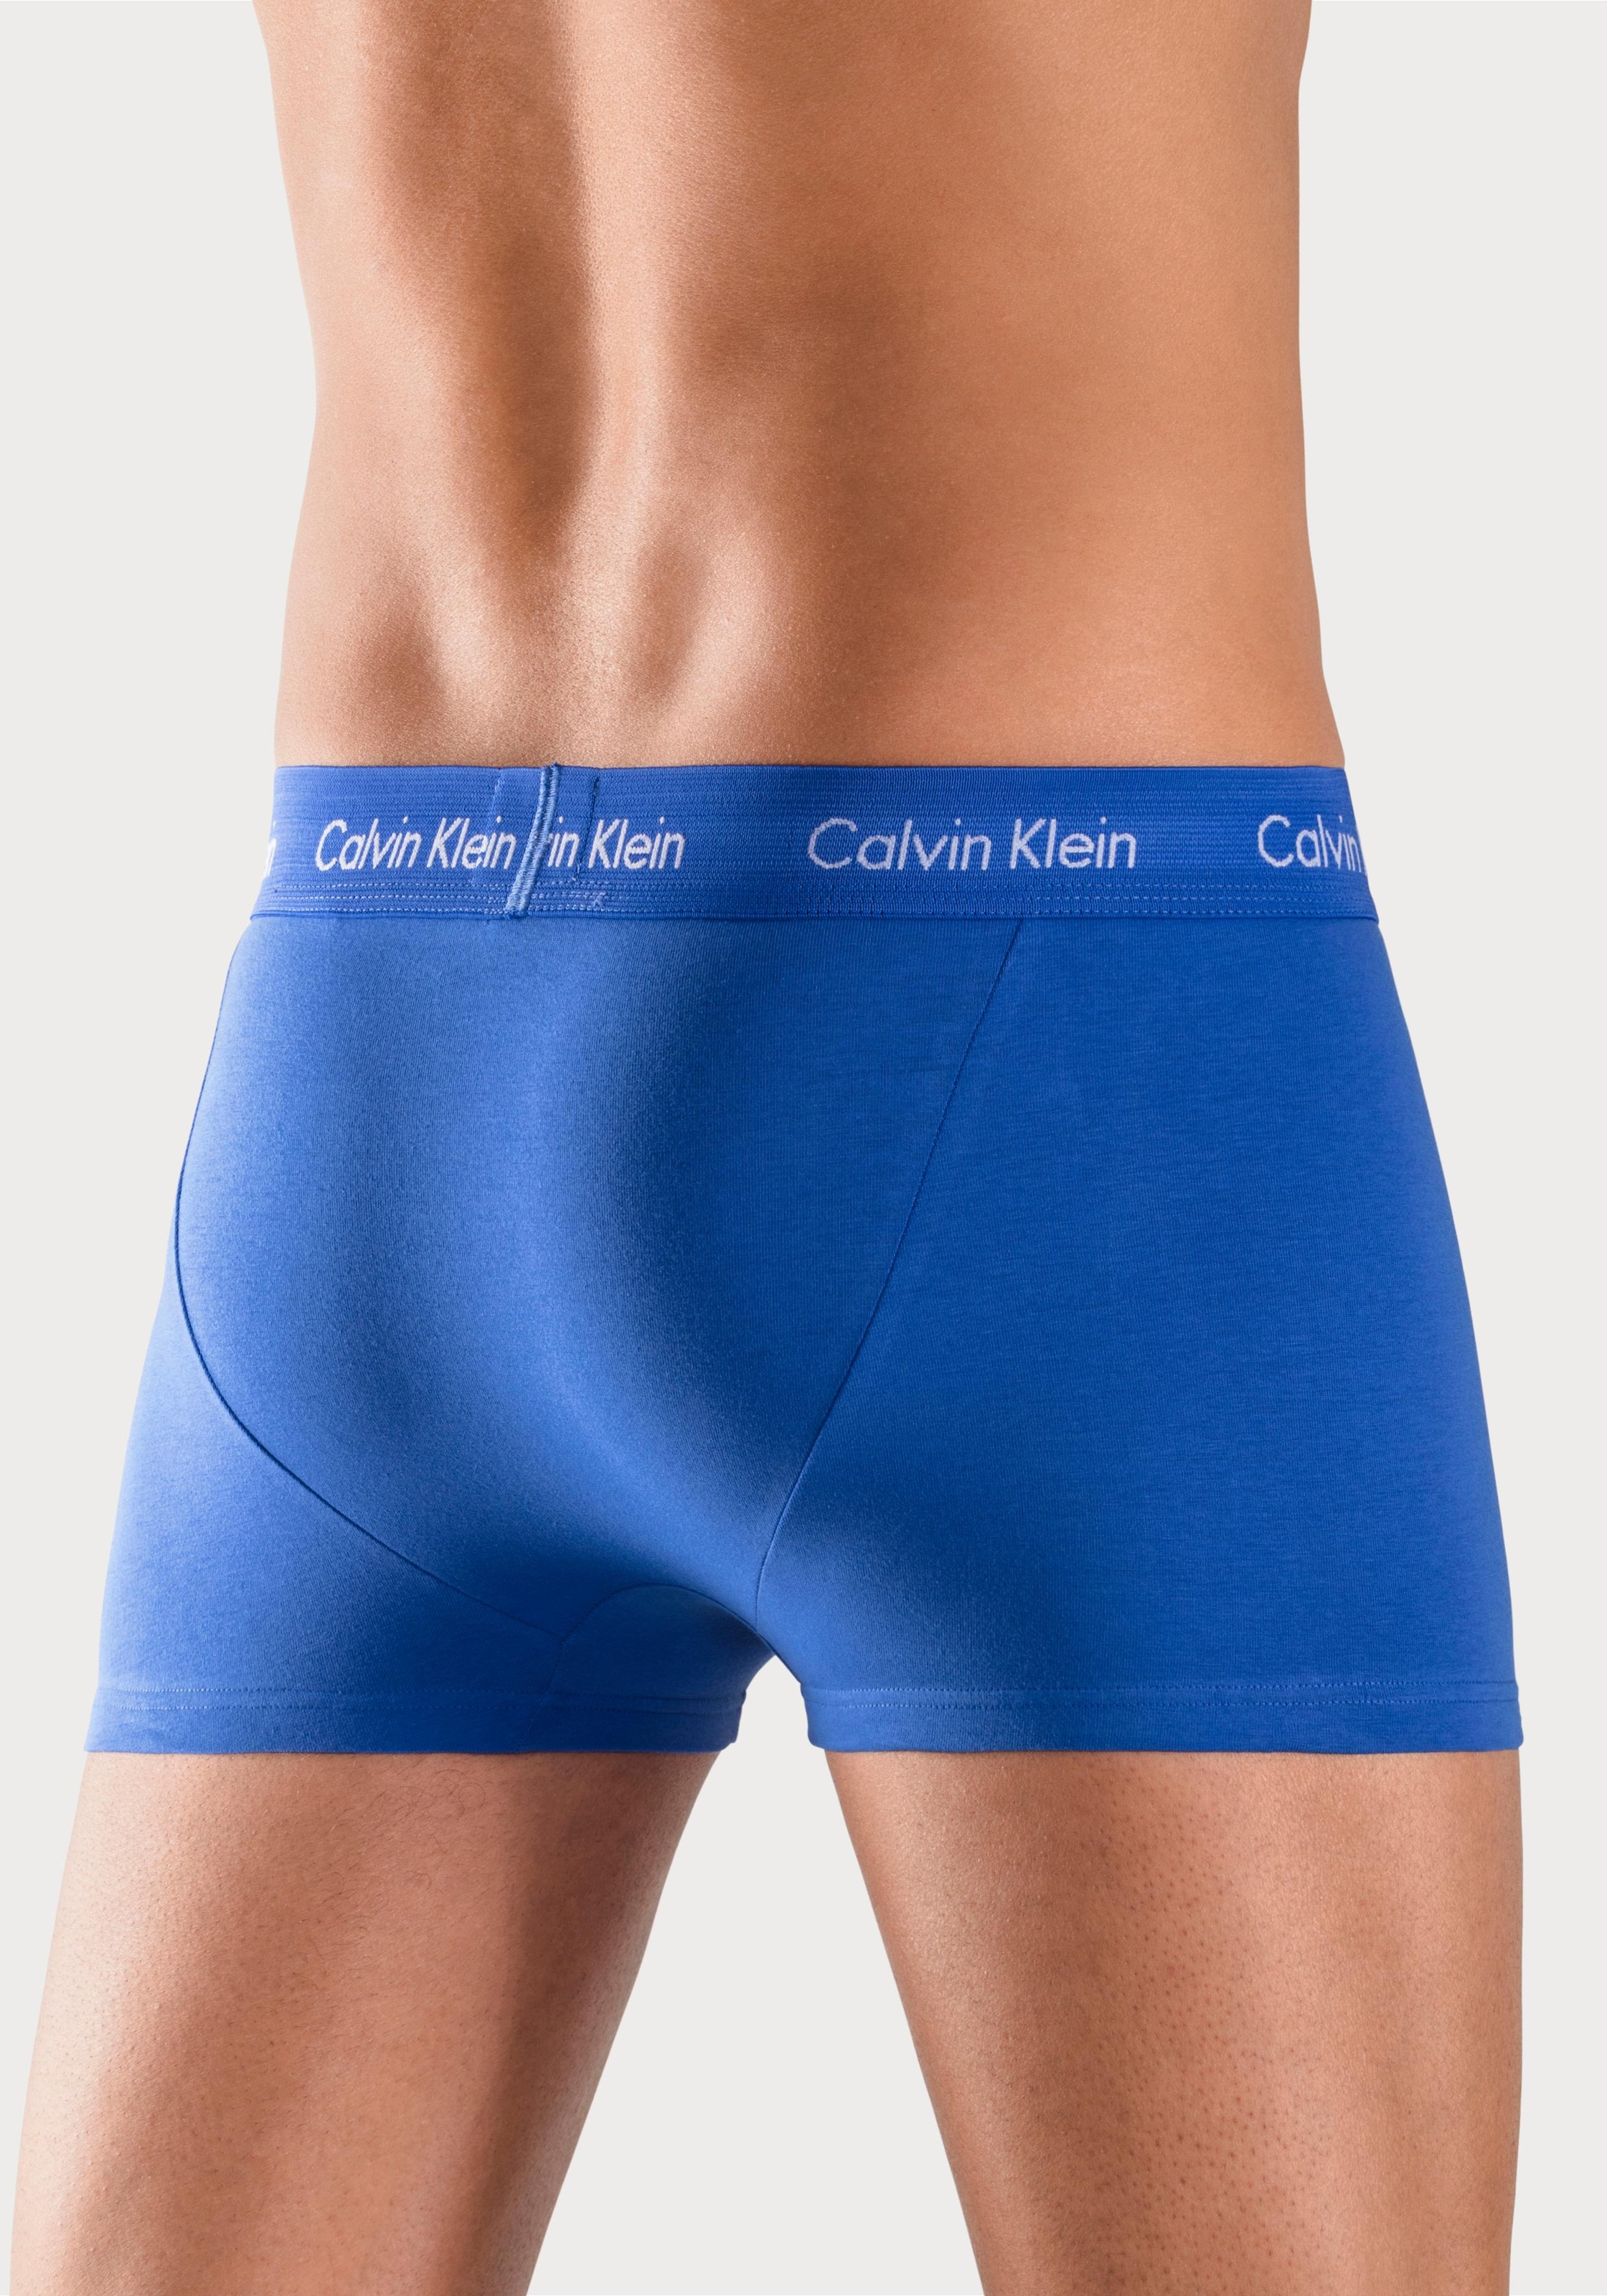 Calvin Klein Cotton Classics Trunks 3-Pack Royalty/Army/Heather